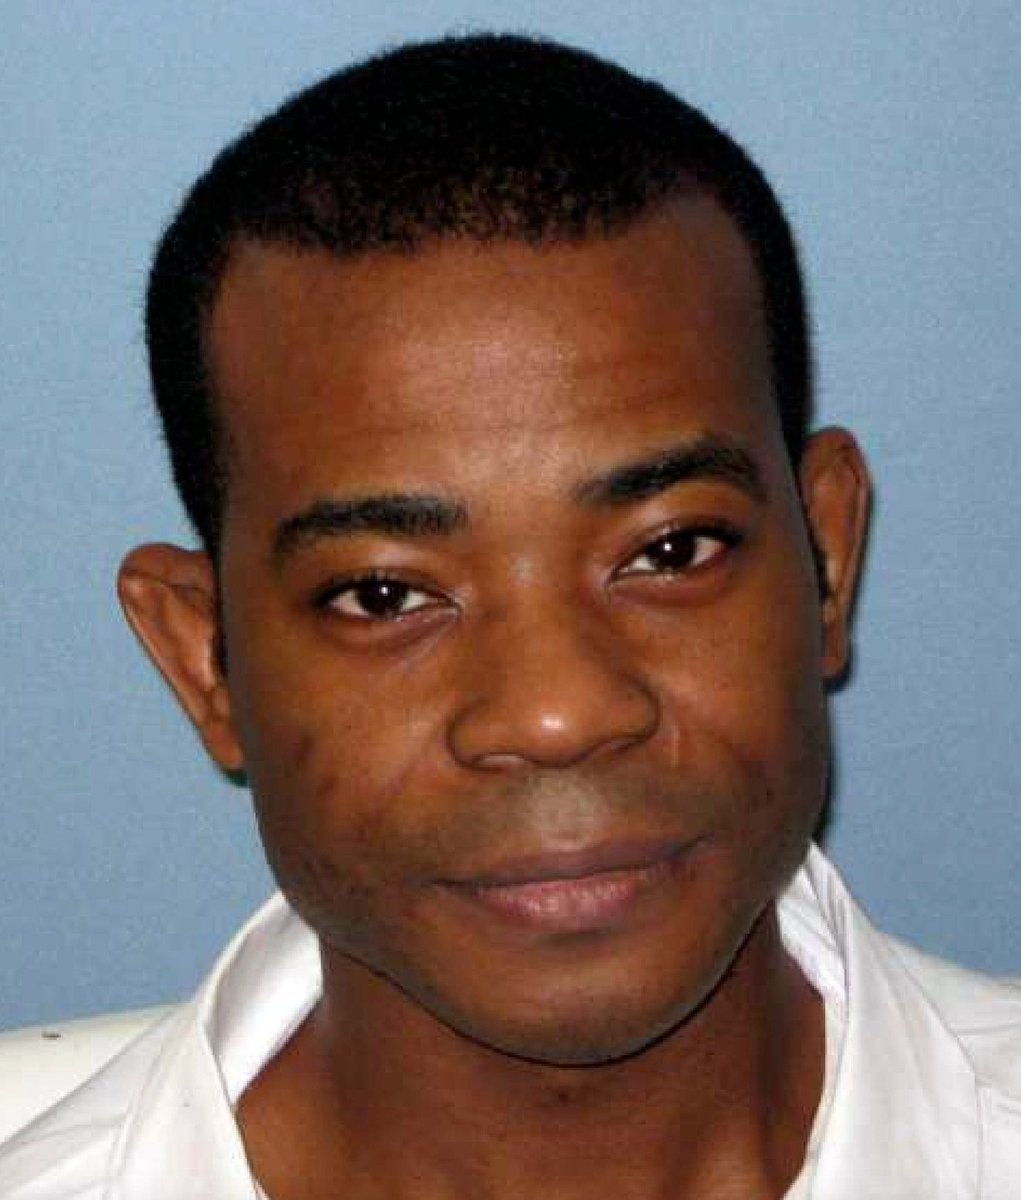 MARCH 5th• Nathaniel Woods executed by stateNathan Woods was executed at Atmore state prison in Alabama, despite several protests & petitions for clemency, including a call to the governor by a victim’s sister stating “He didn’t kill my brother & he didn’t kill the other[s]”